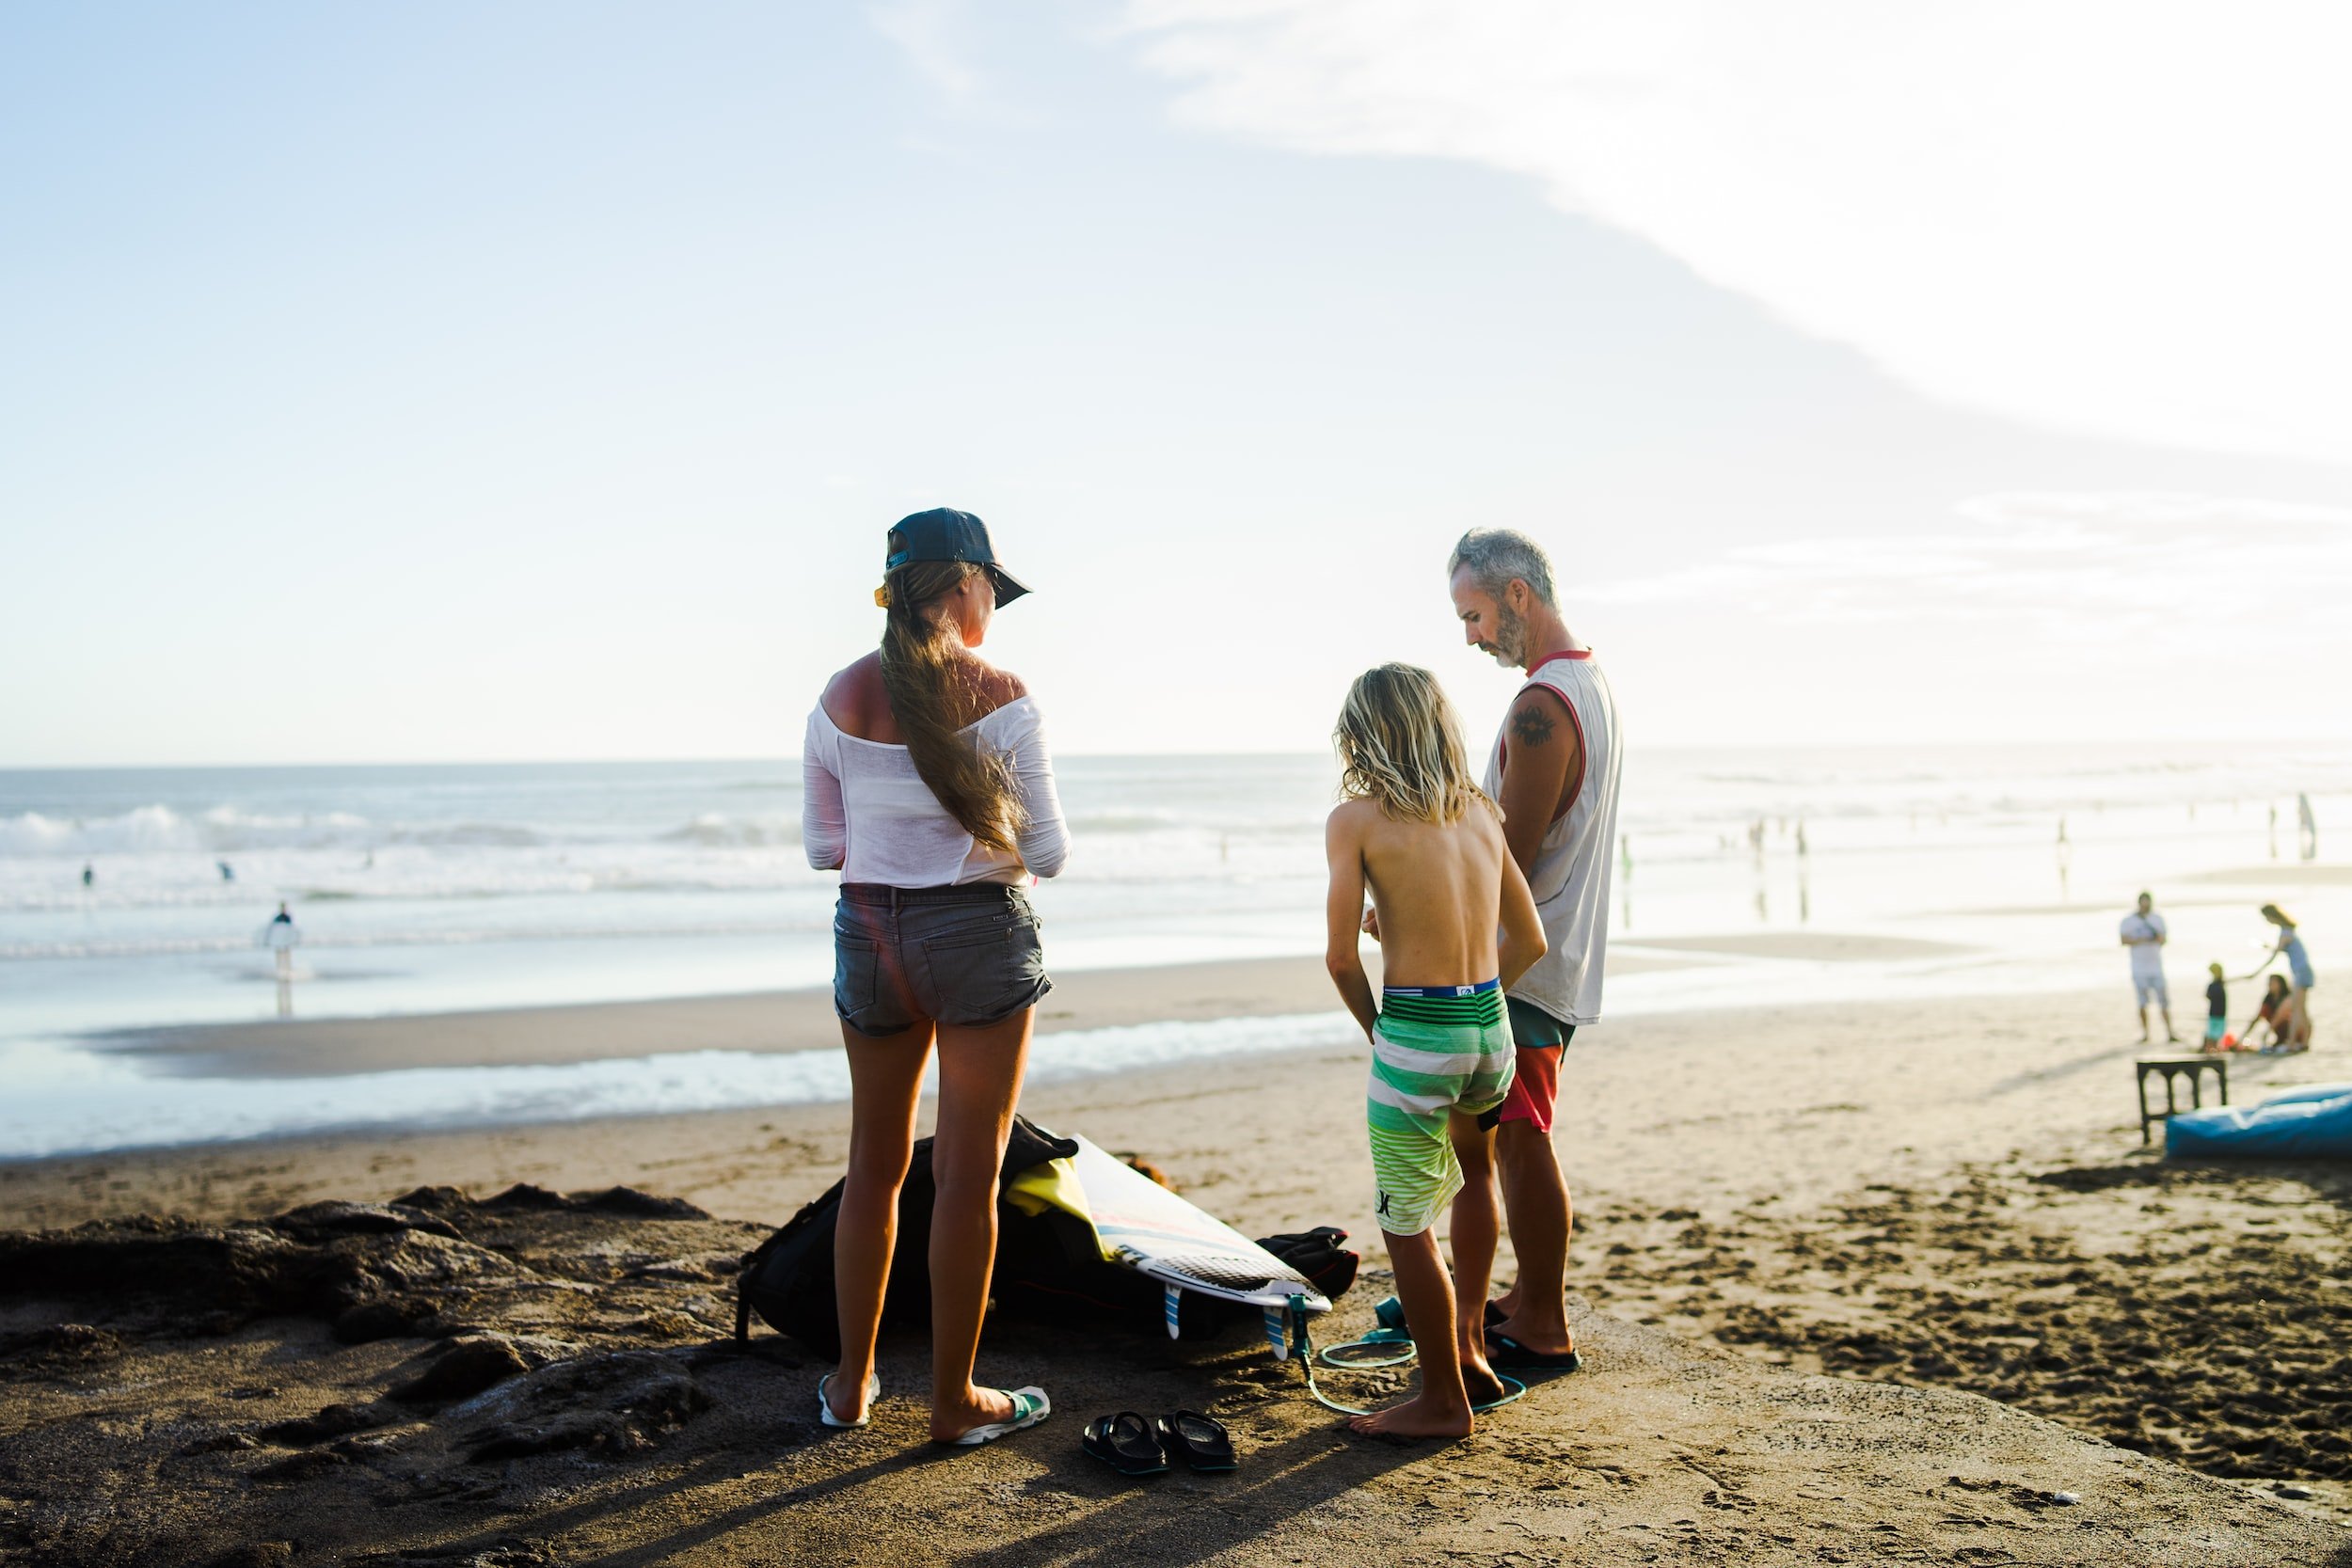 August is a great month for families to have a Bali beach holiday